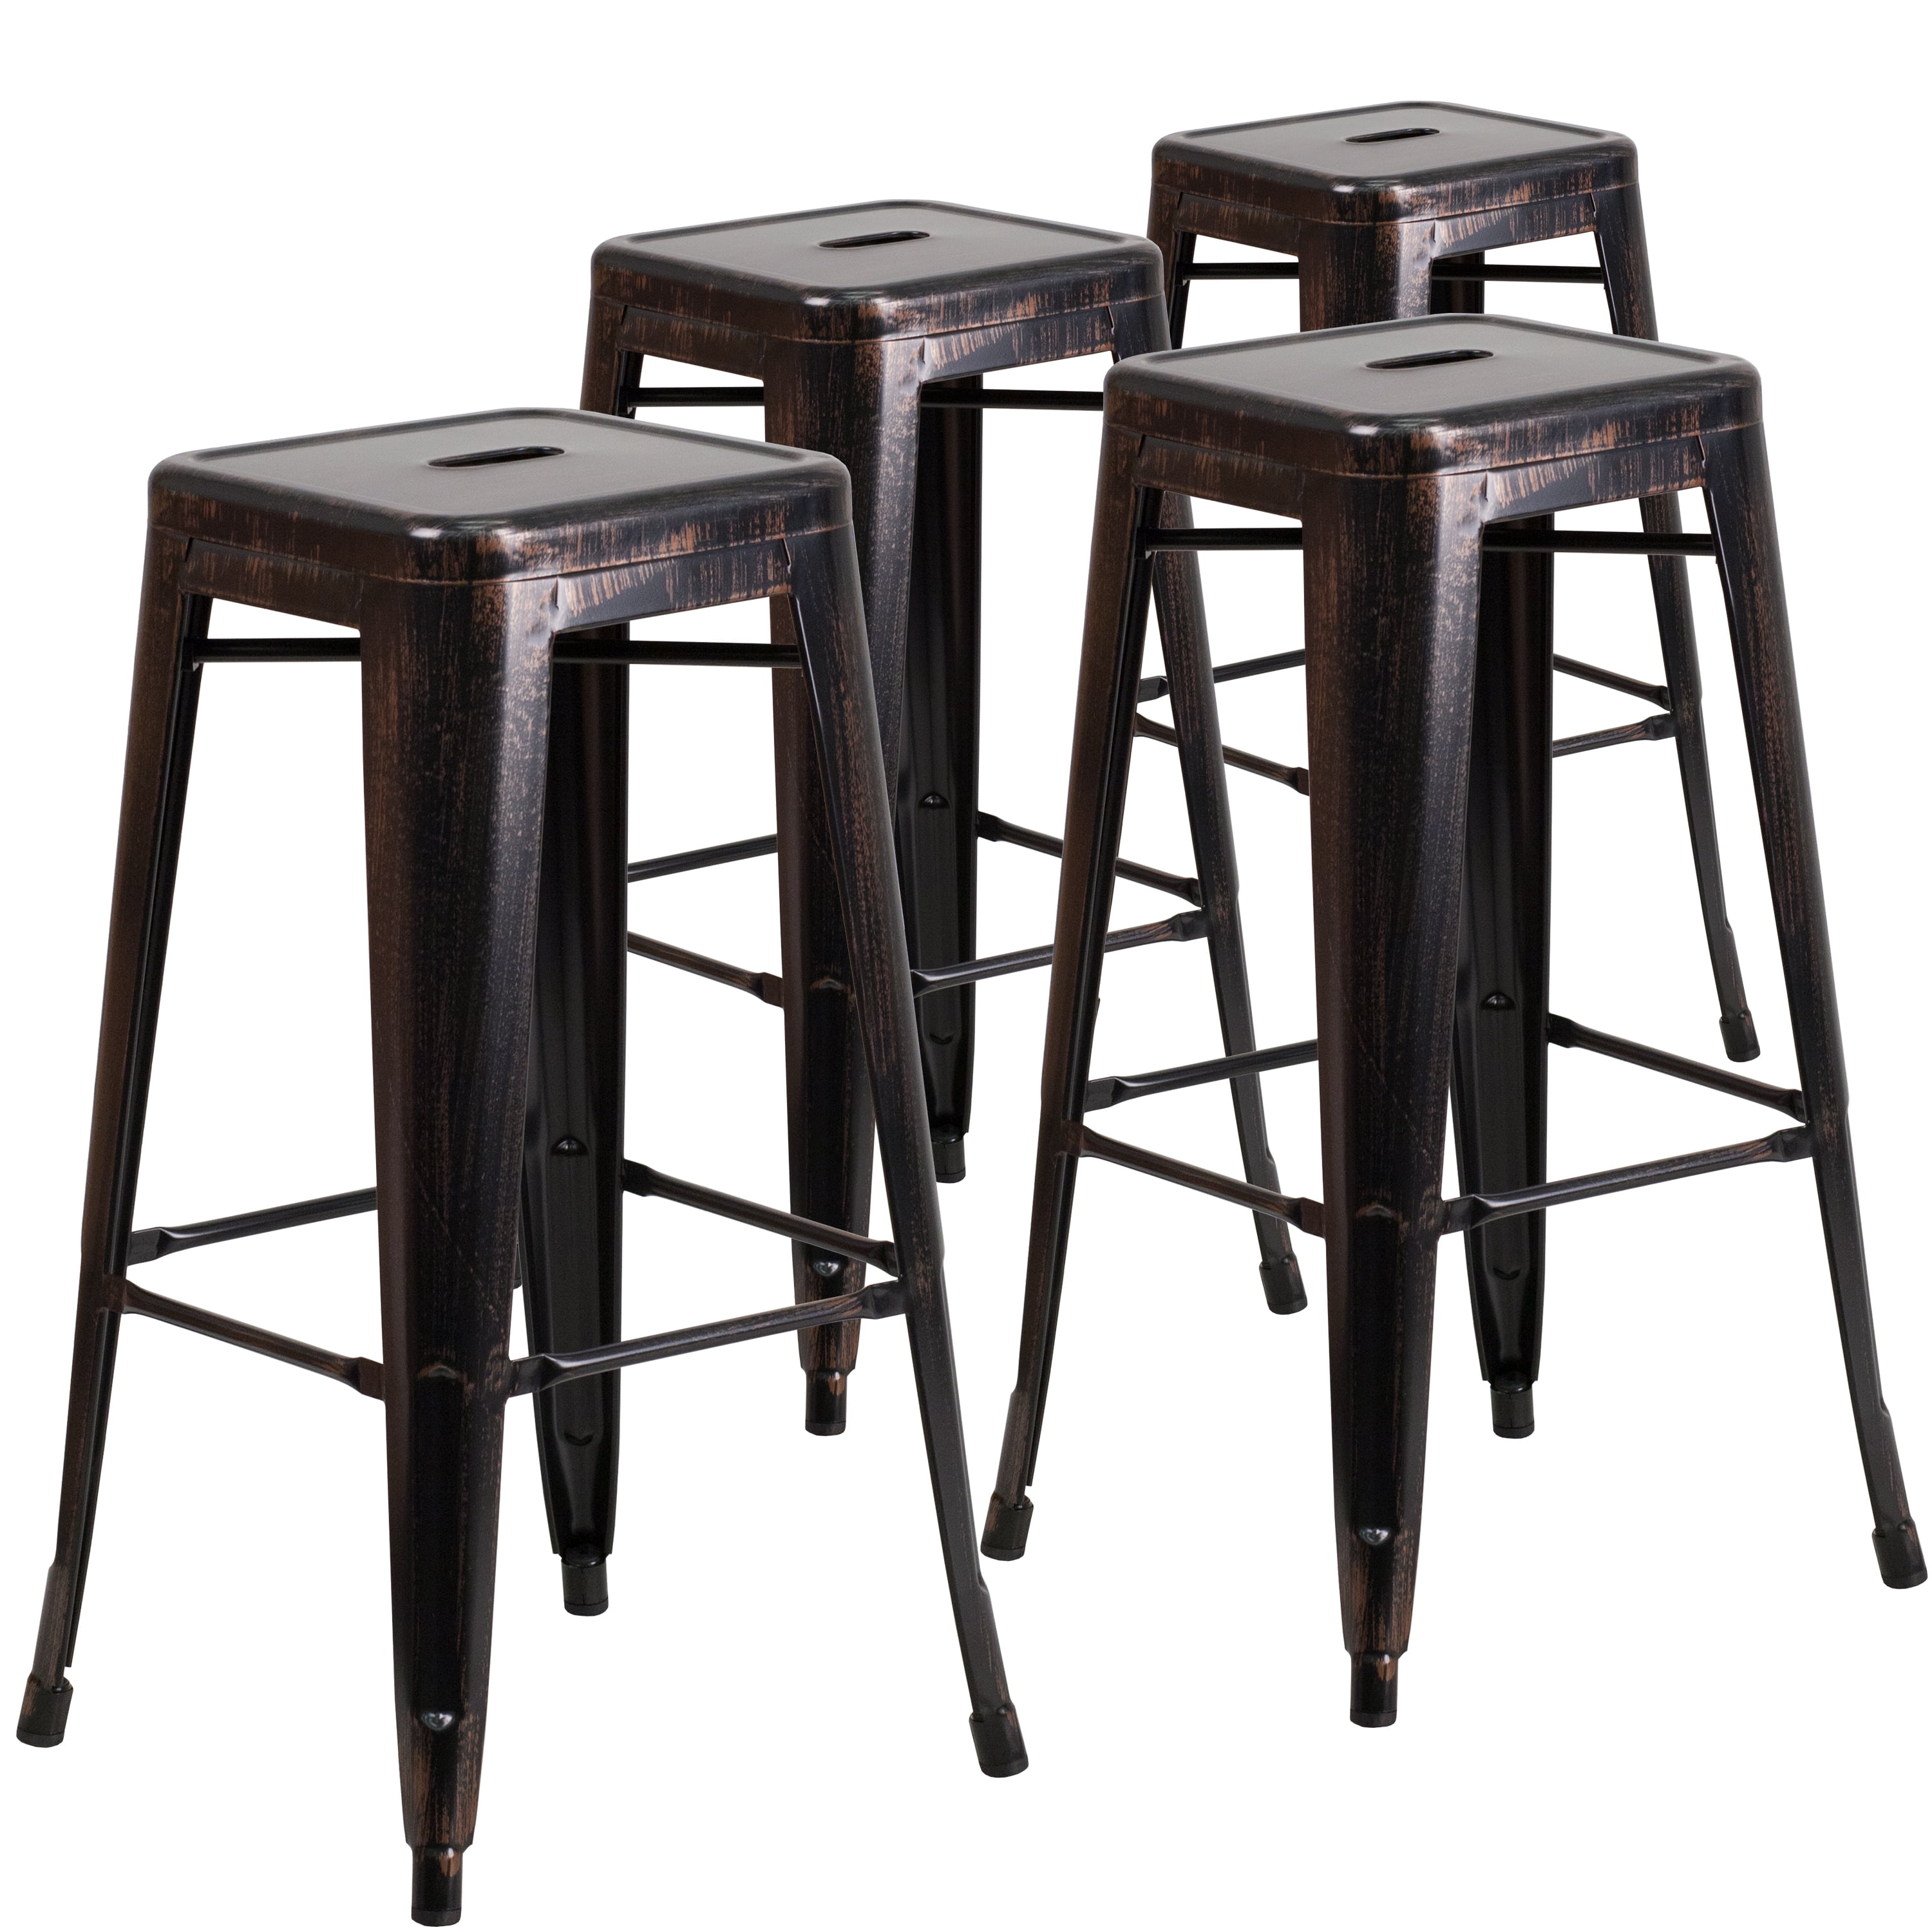 30" High Backless Black-Antique Gold Metal Indoor-Outdoor Barstool w/Square Seat 